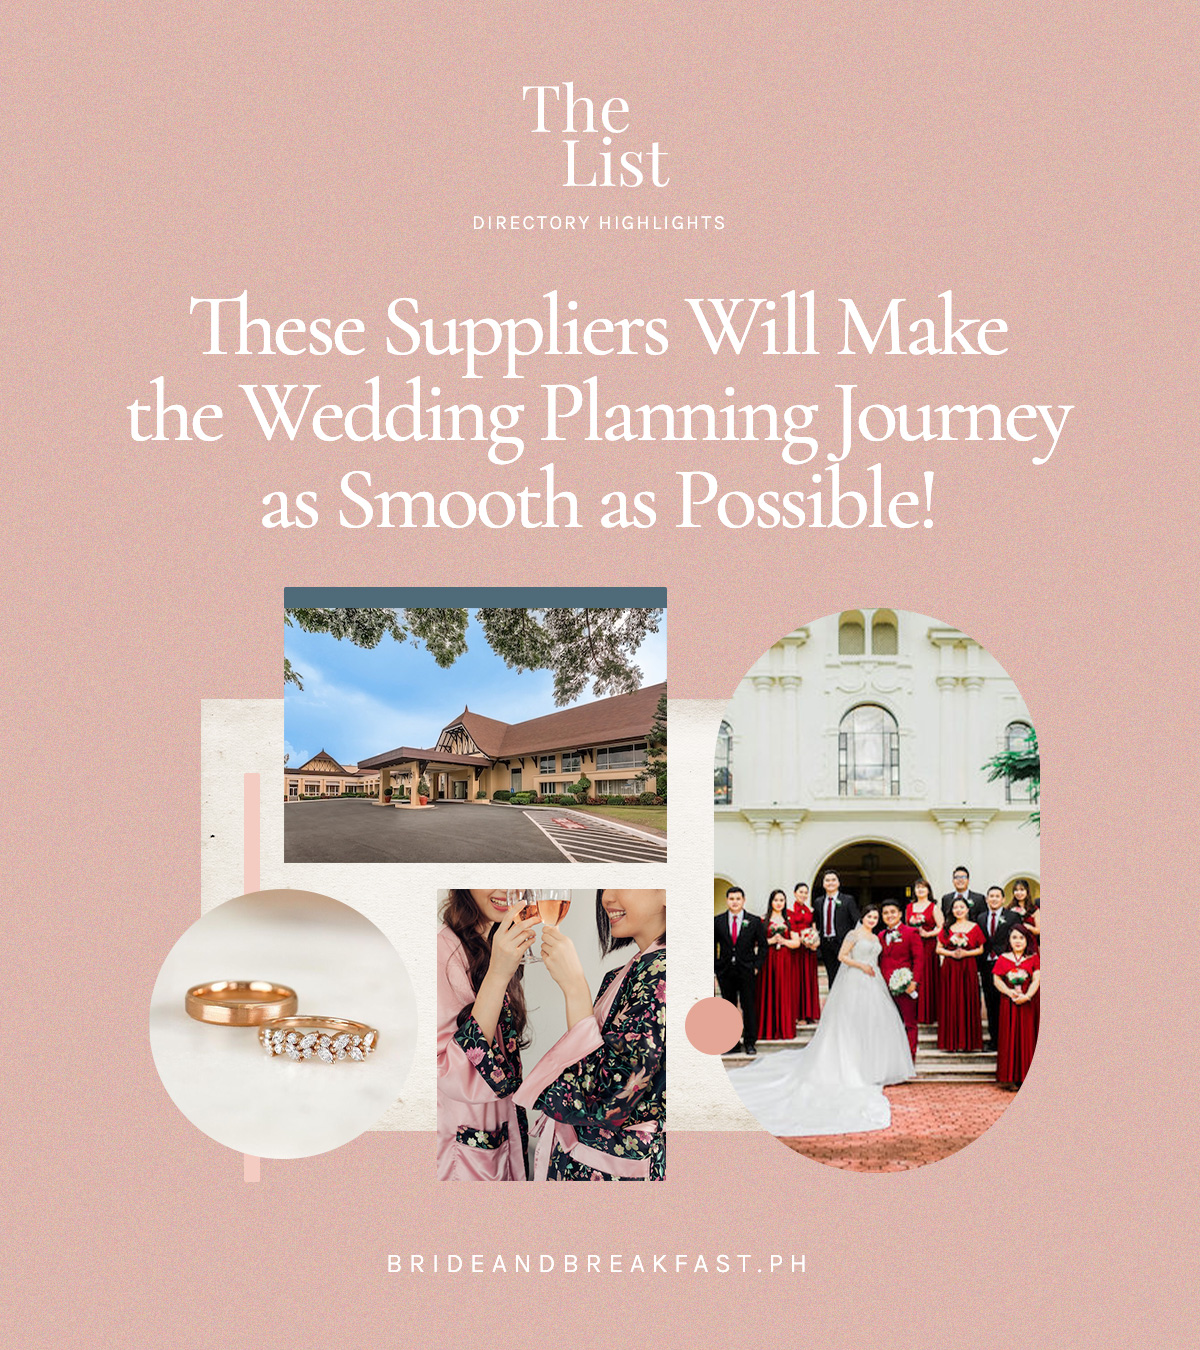 These Suppliers Will Make the Wedding Planning Journey as Smooth as Possible